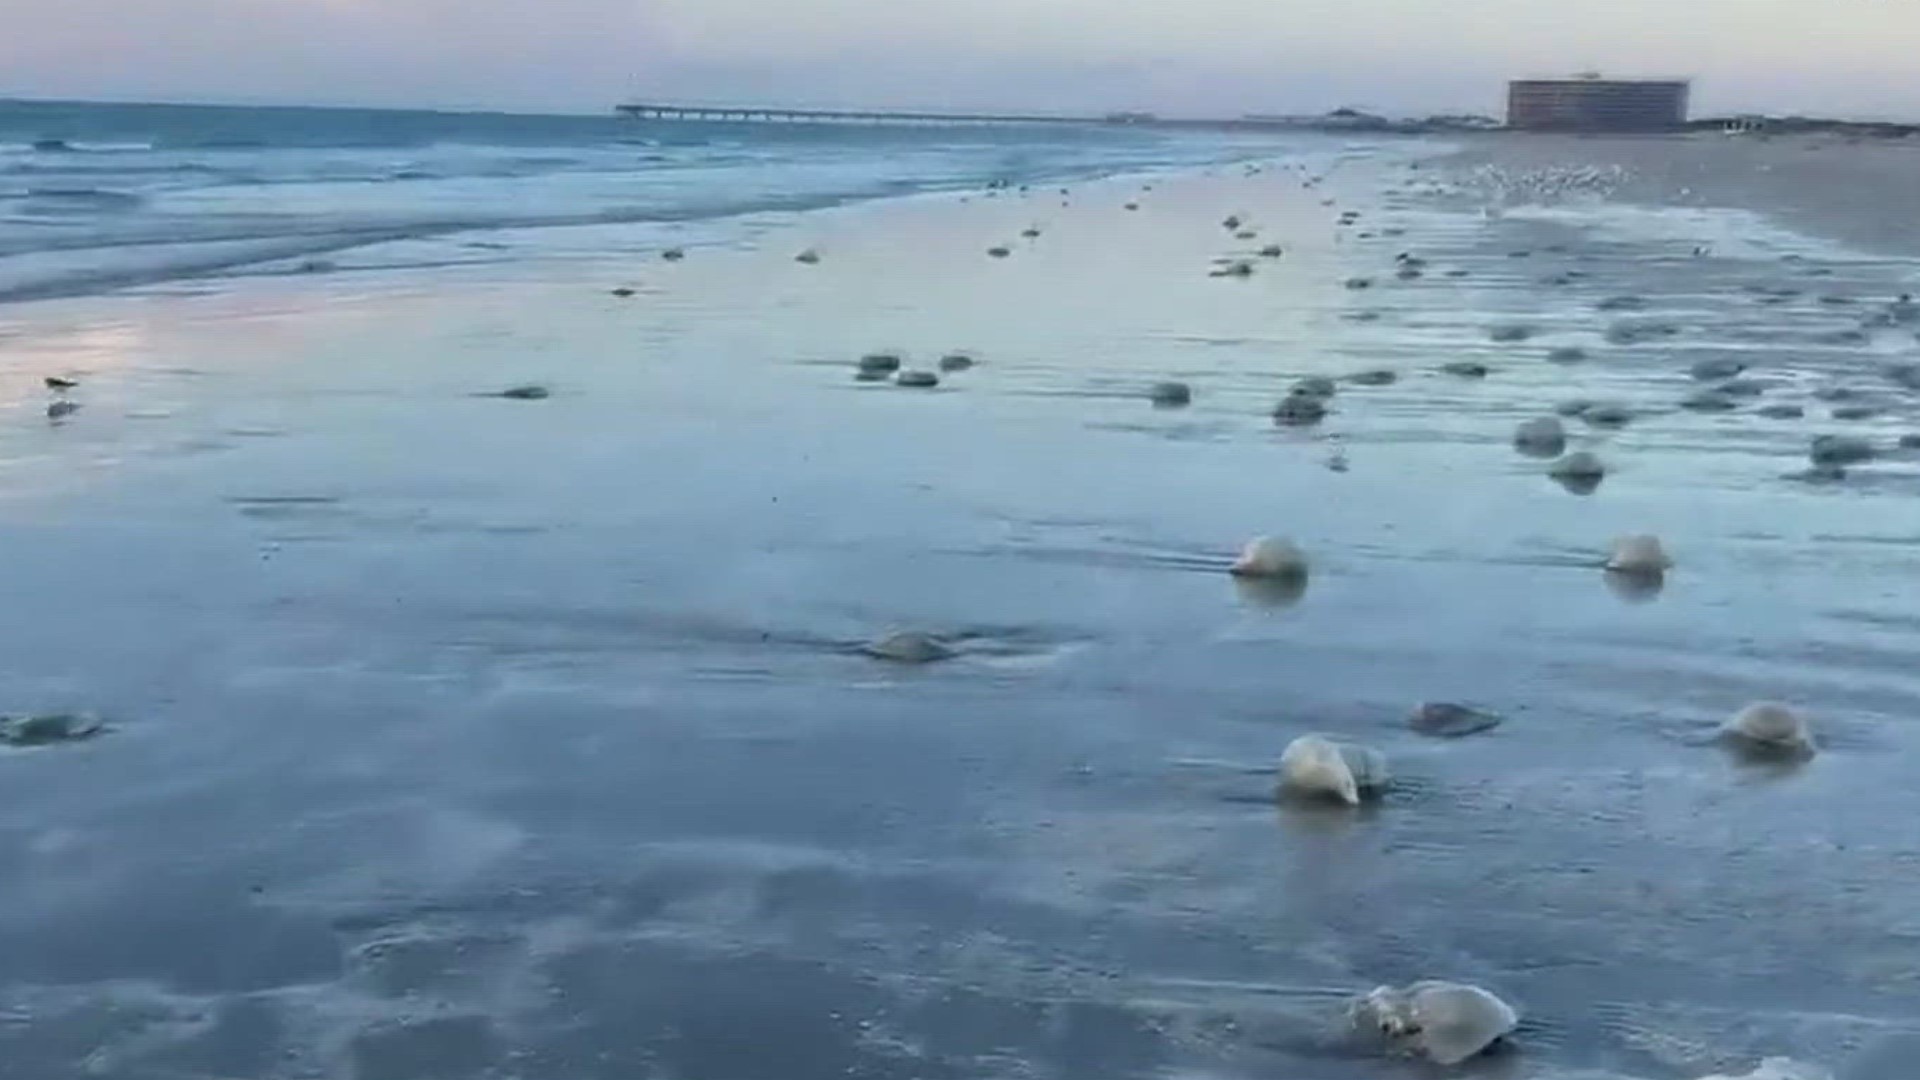 Dozens of cabbage head jellyfish, also called cannonball jellyfish can be found washed up on the shore of the Port Aransas jetties.